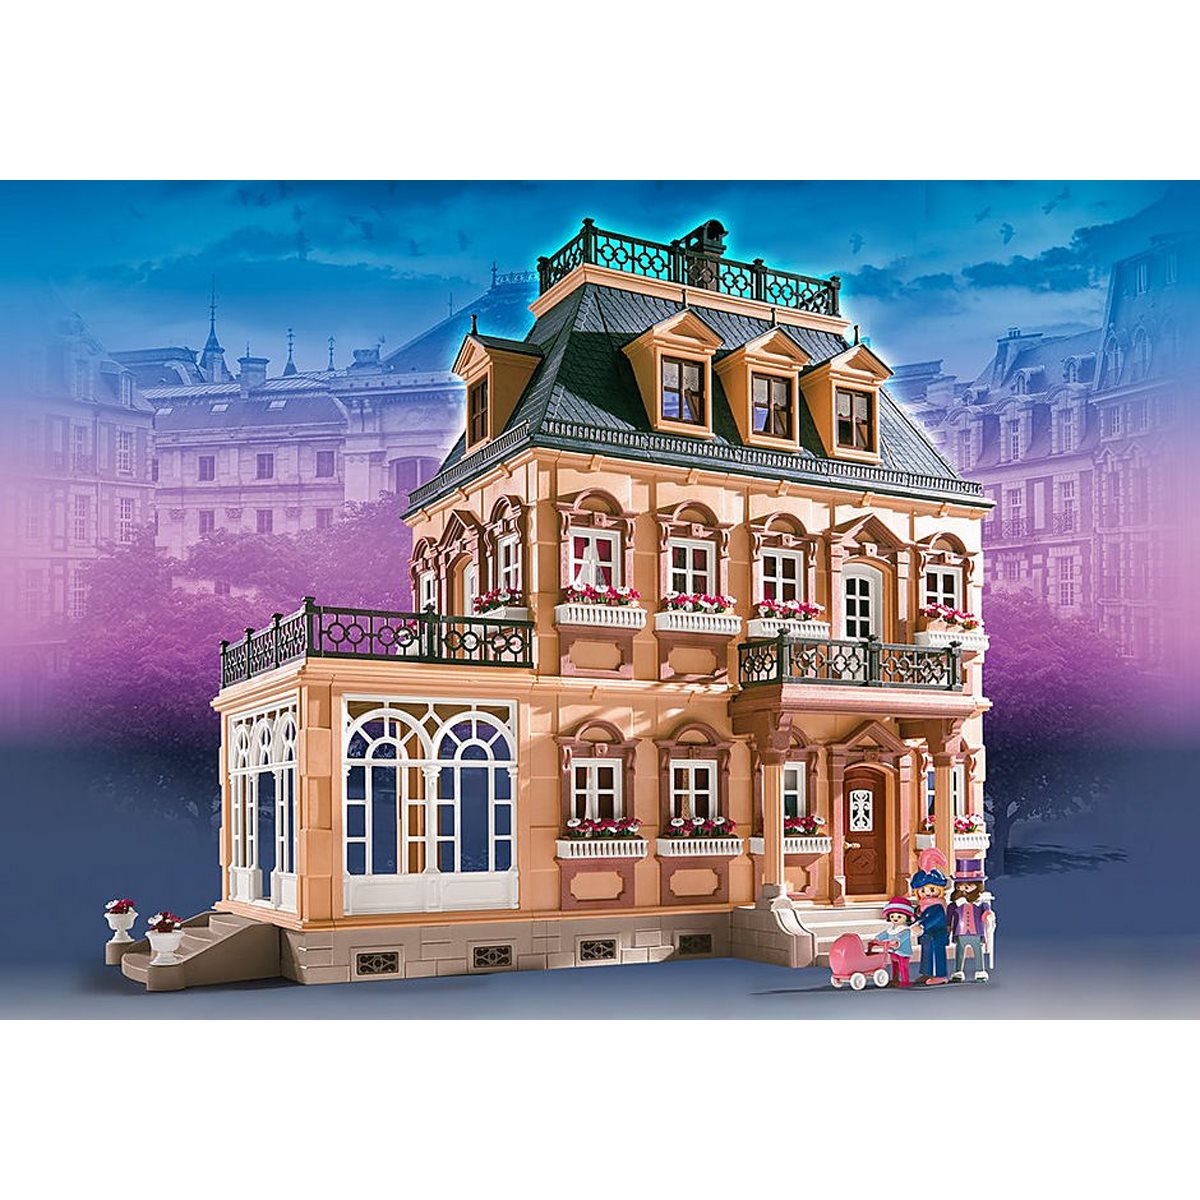 Playmobil 70890 Large Victorian Doll House